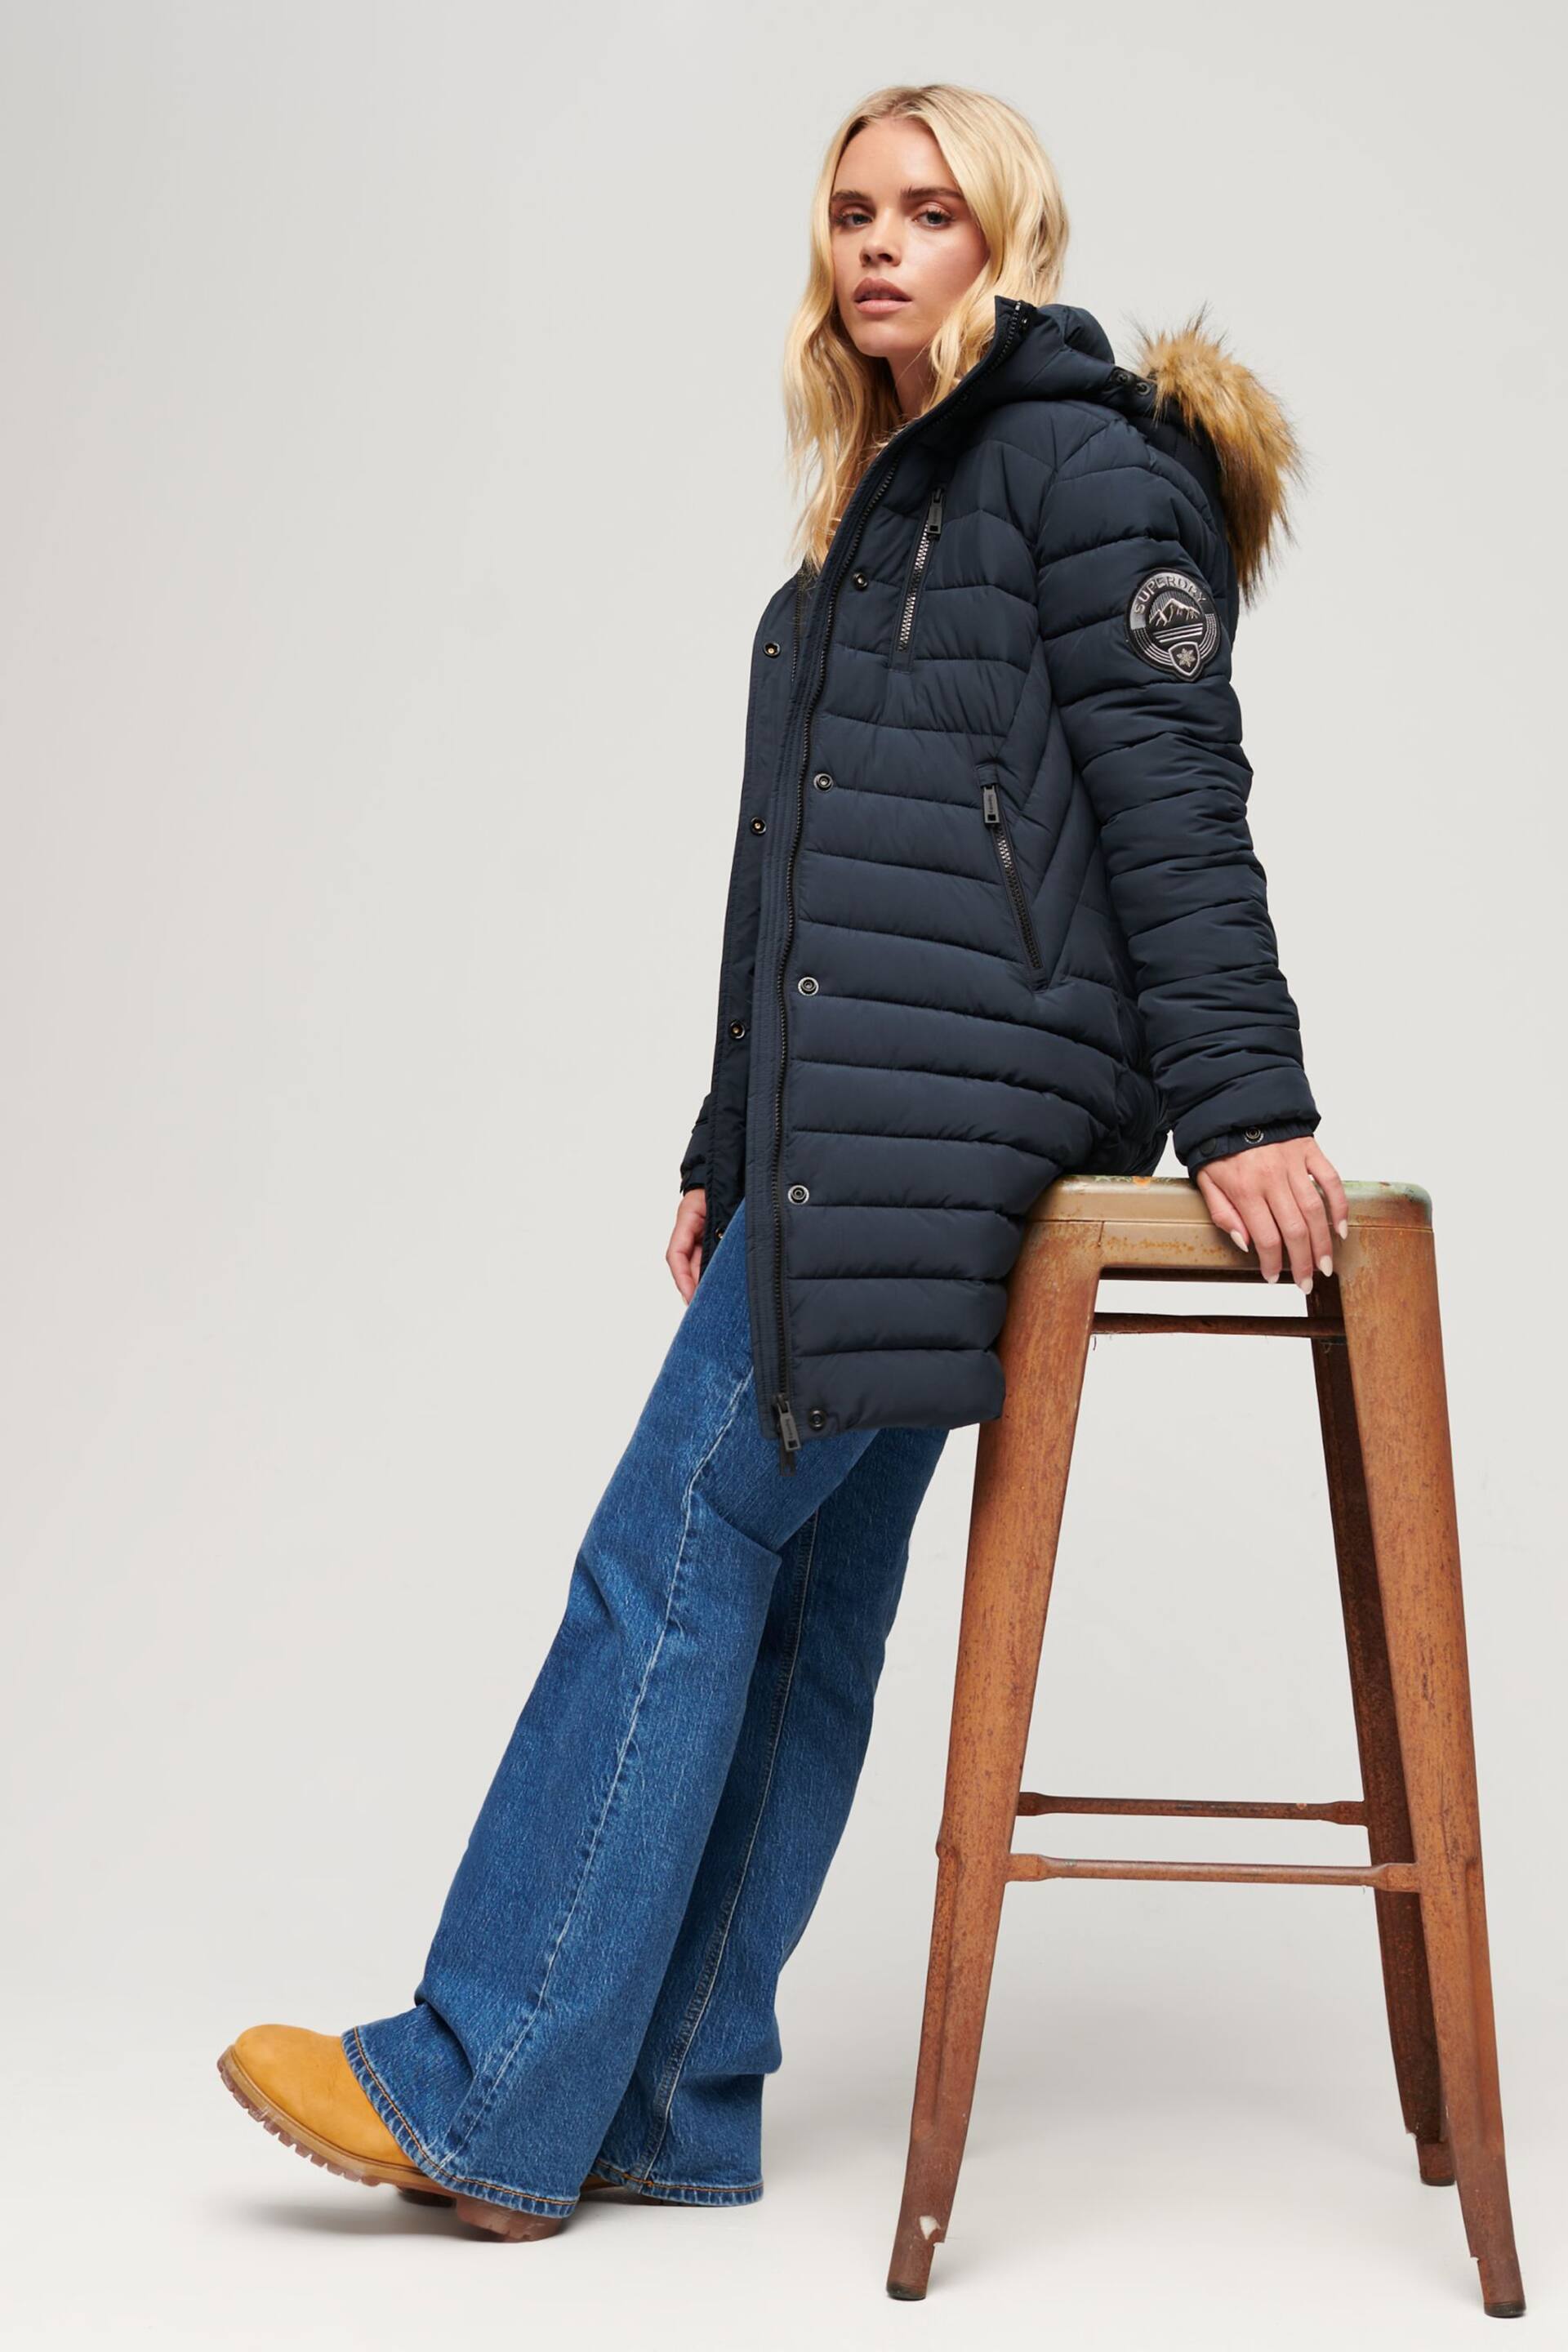 Superdry Blue Fuji Hooded Mid Length Puffer Jacket - Image 4 of 7